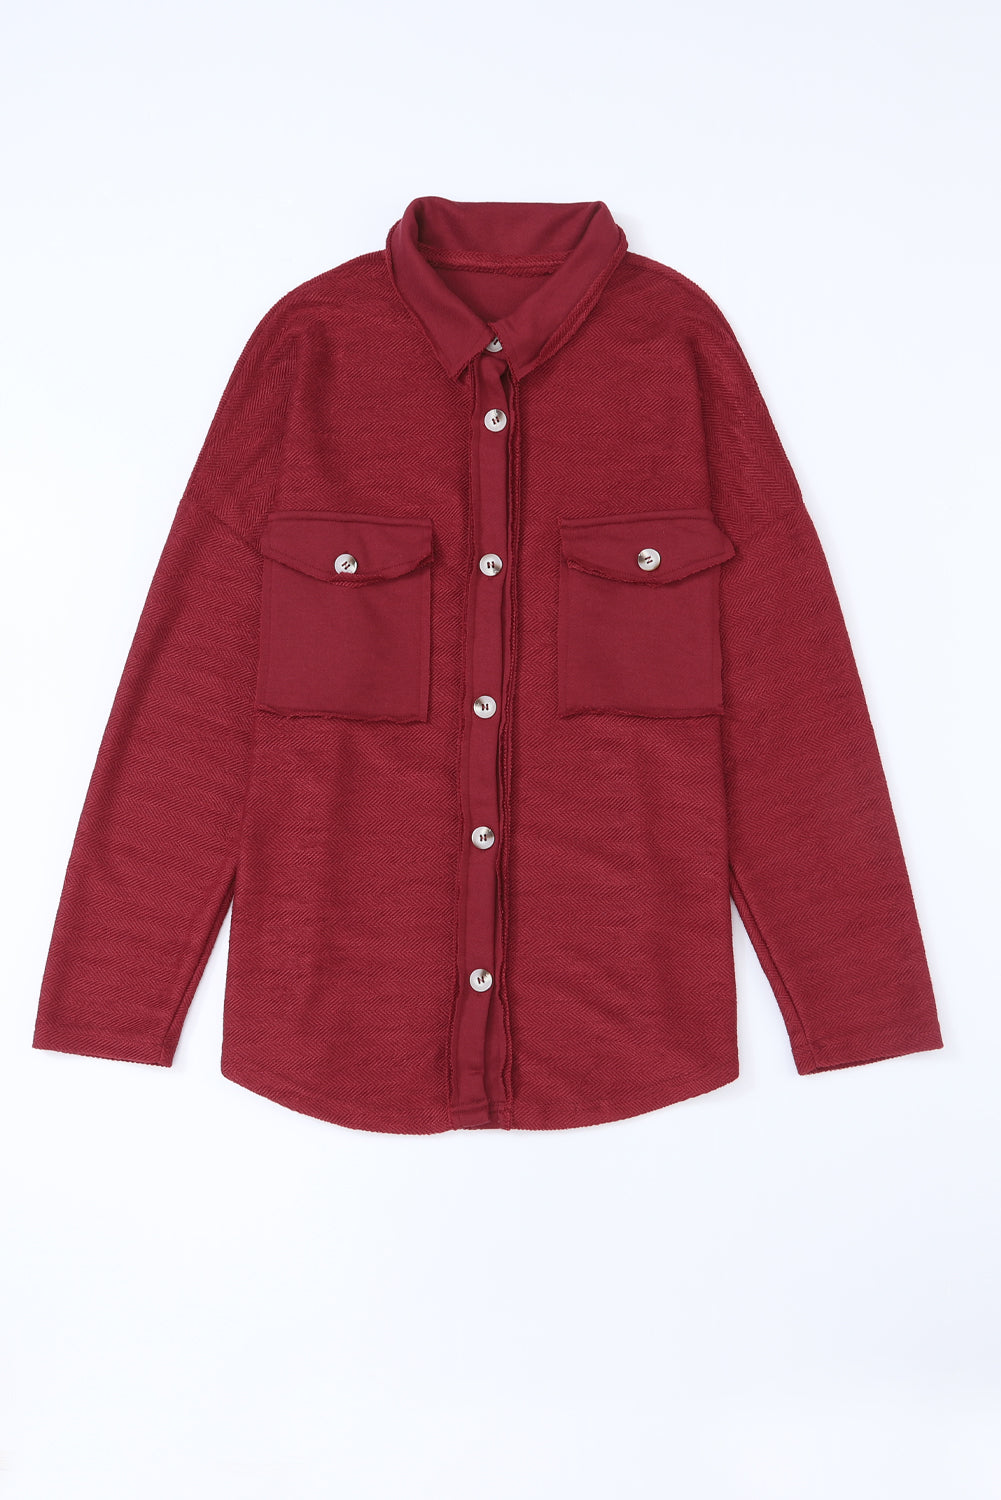 Red Contrast Flap Pockets Relaxed Shacket